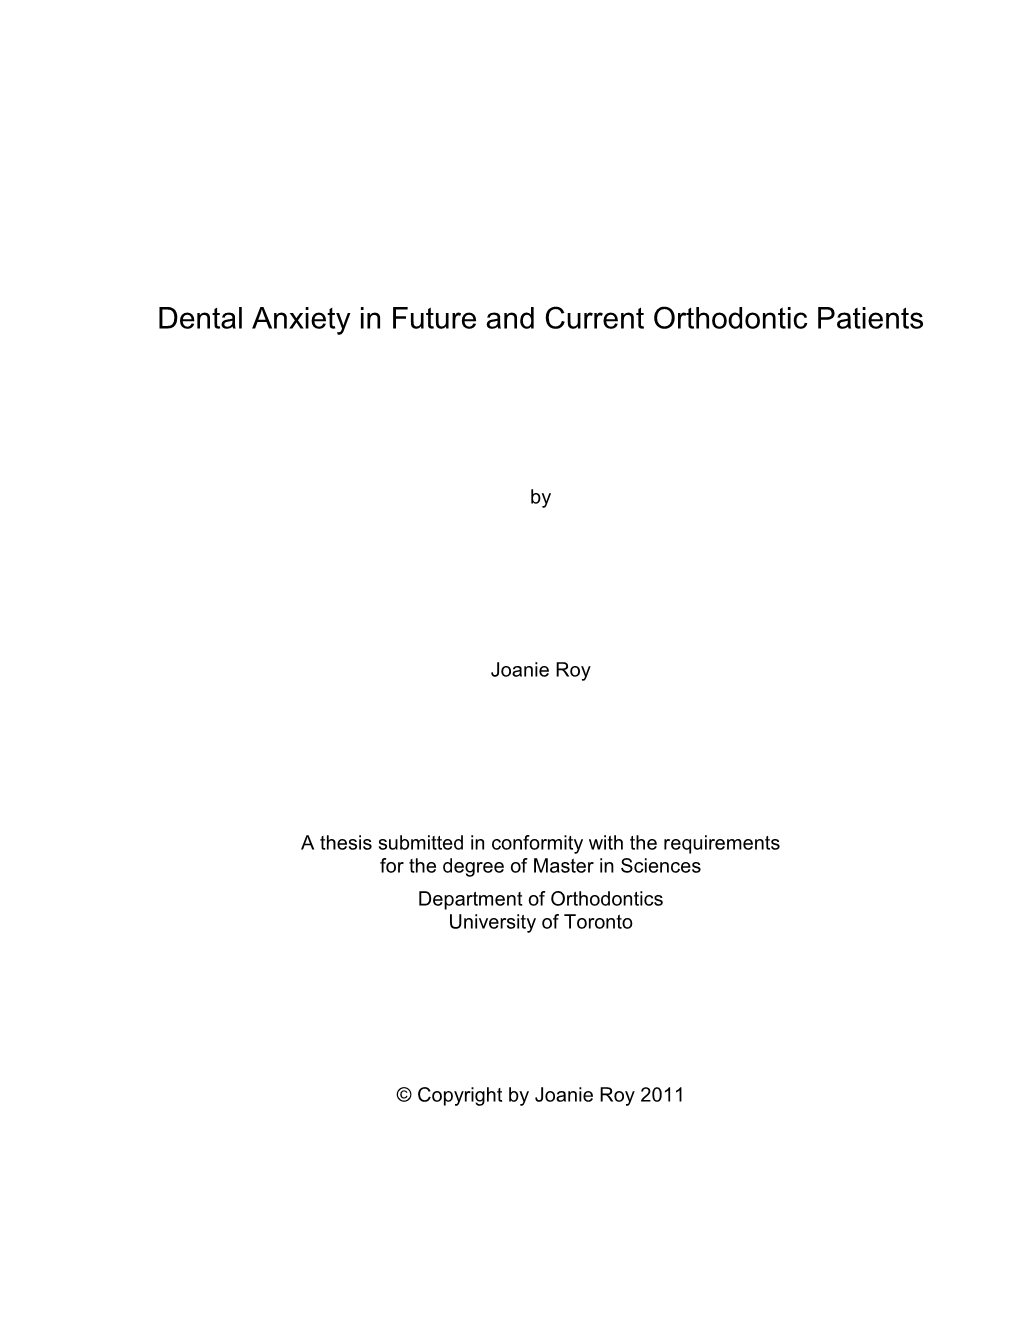 Dental Anxiety in Future and Current Orthodontic Patients